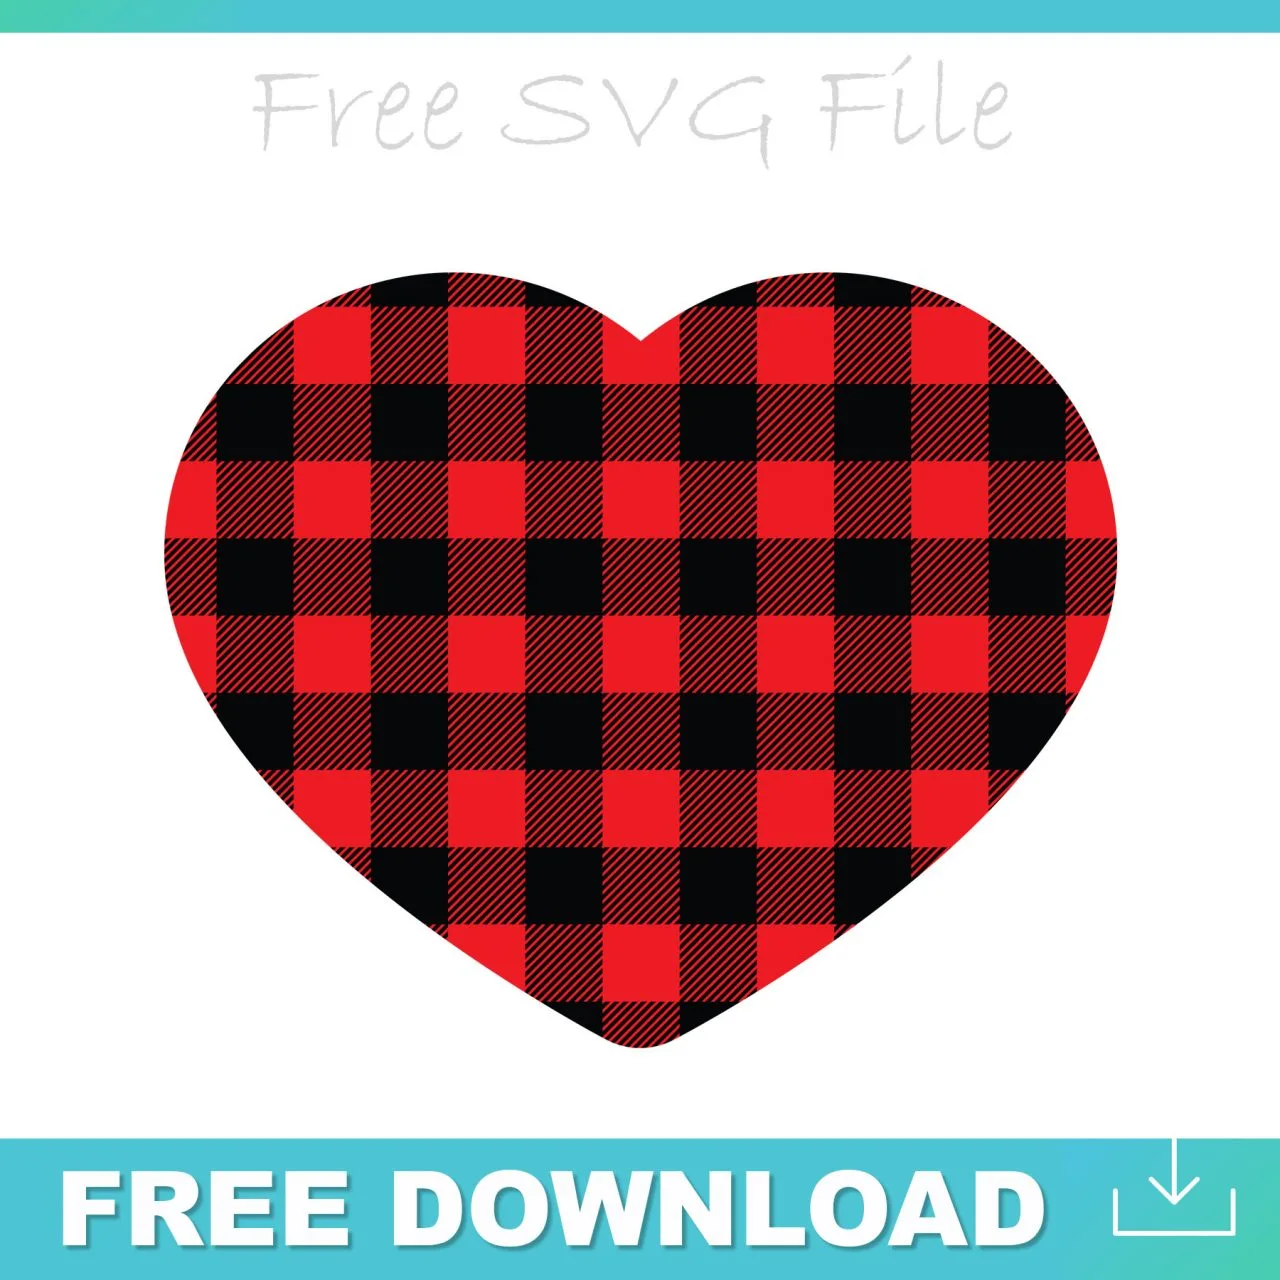 Download Heart Svg Free Sharing 10 Free Heart Svg Files